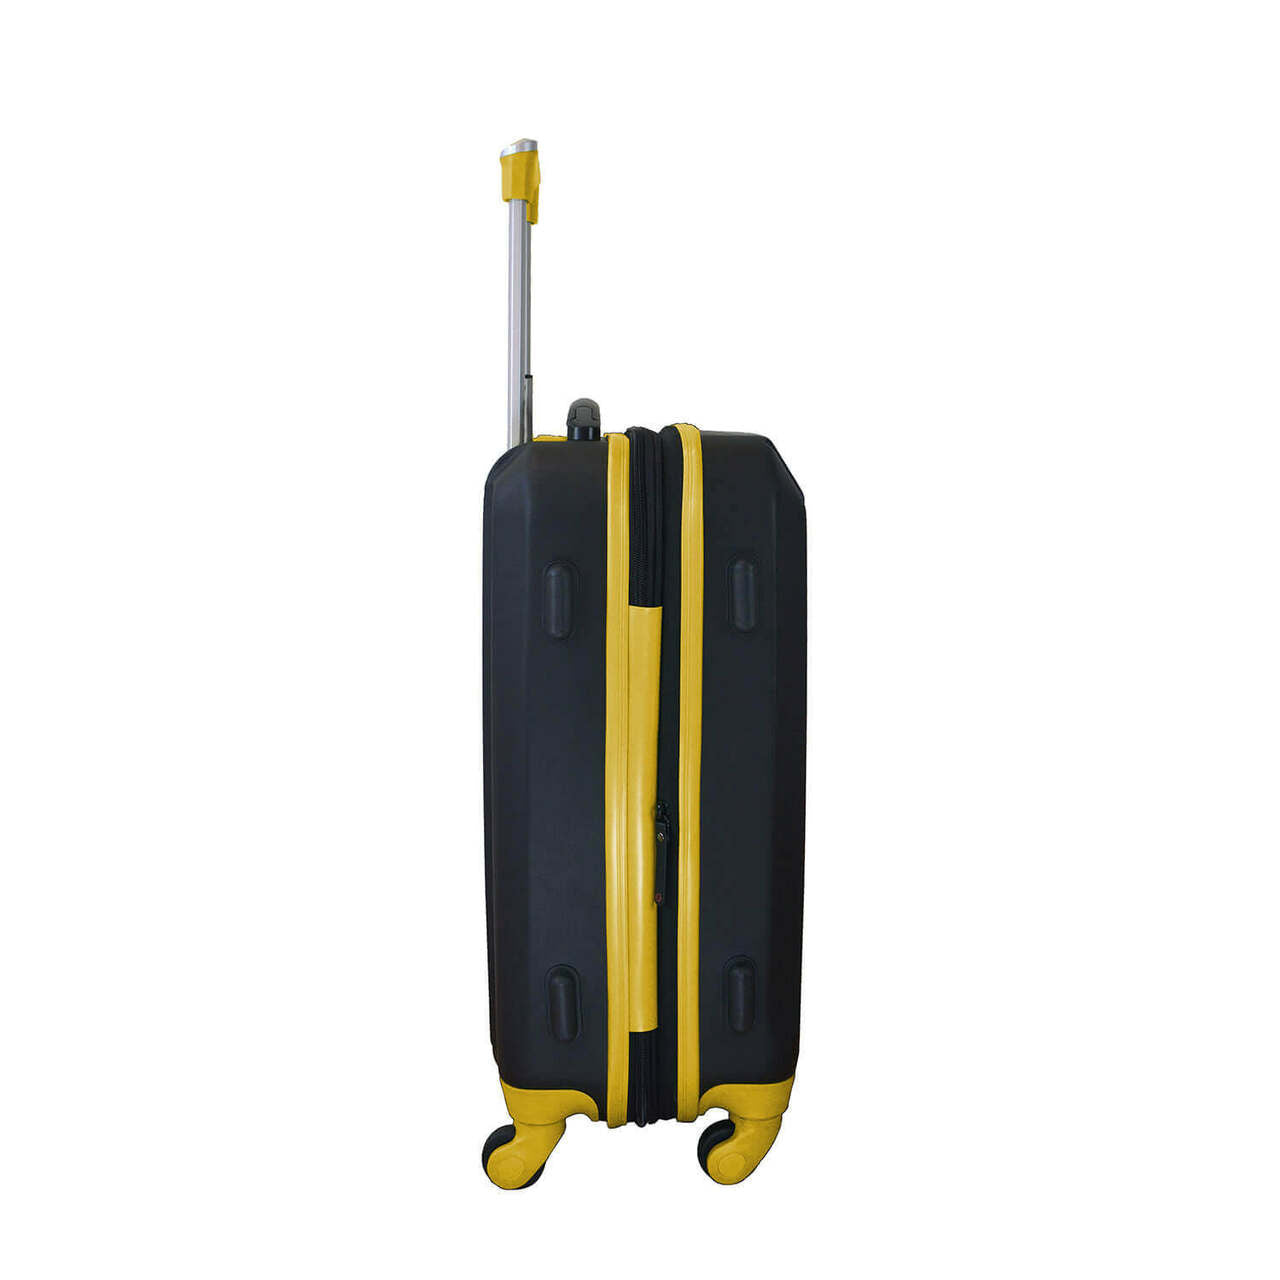 Sabres Carry On Spinner Luggage | Buffalo Sabres Hardcase Two-Tone Luggage Carry-on Spinner in Yellow